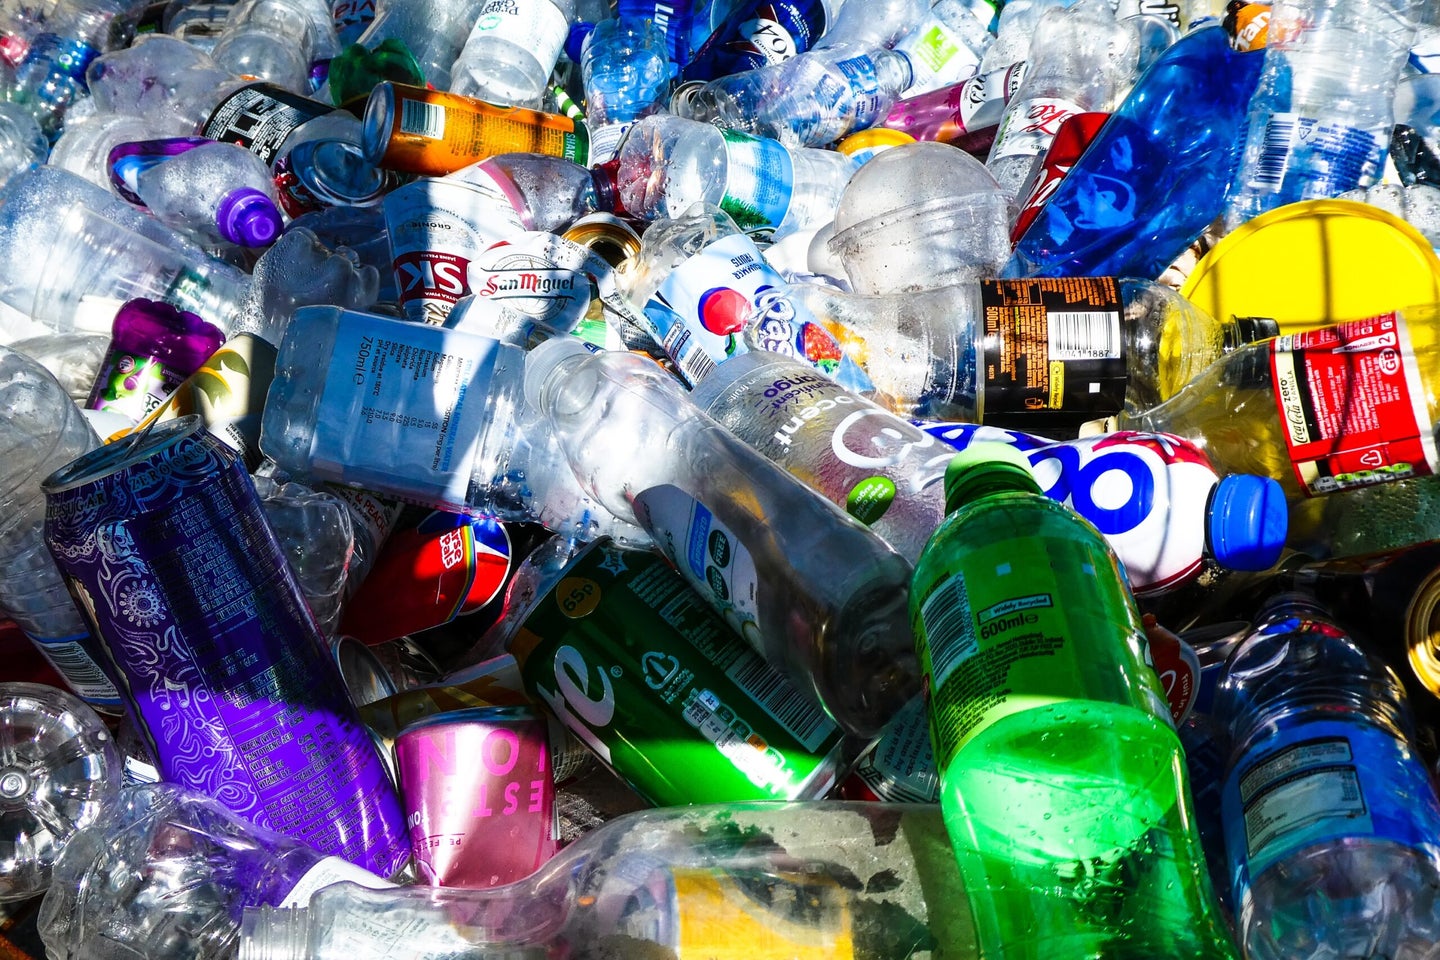 Pile of plastic bottles and waste.